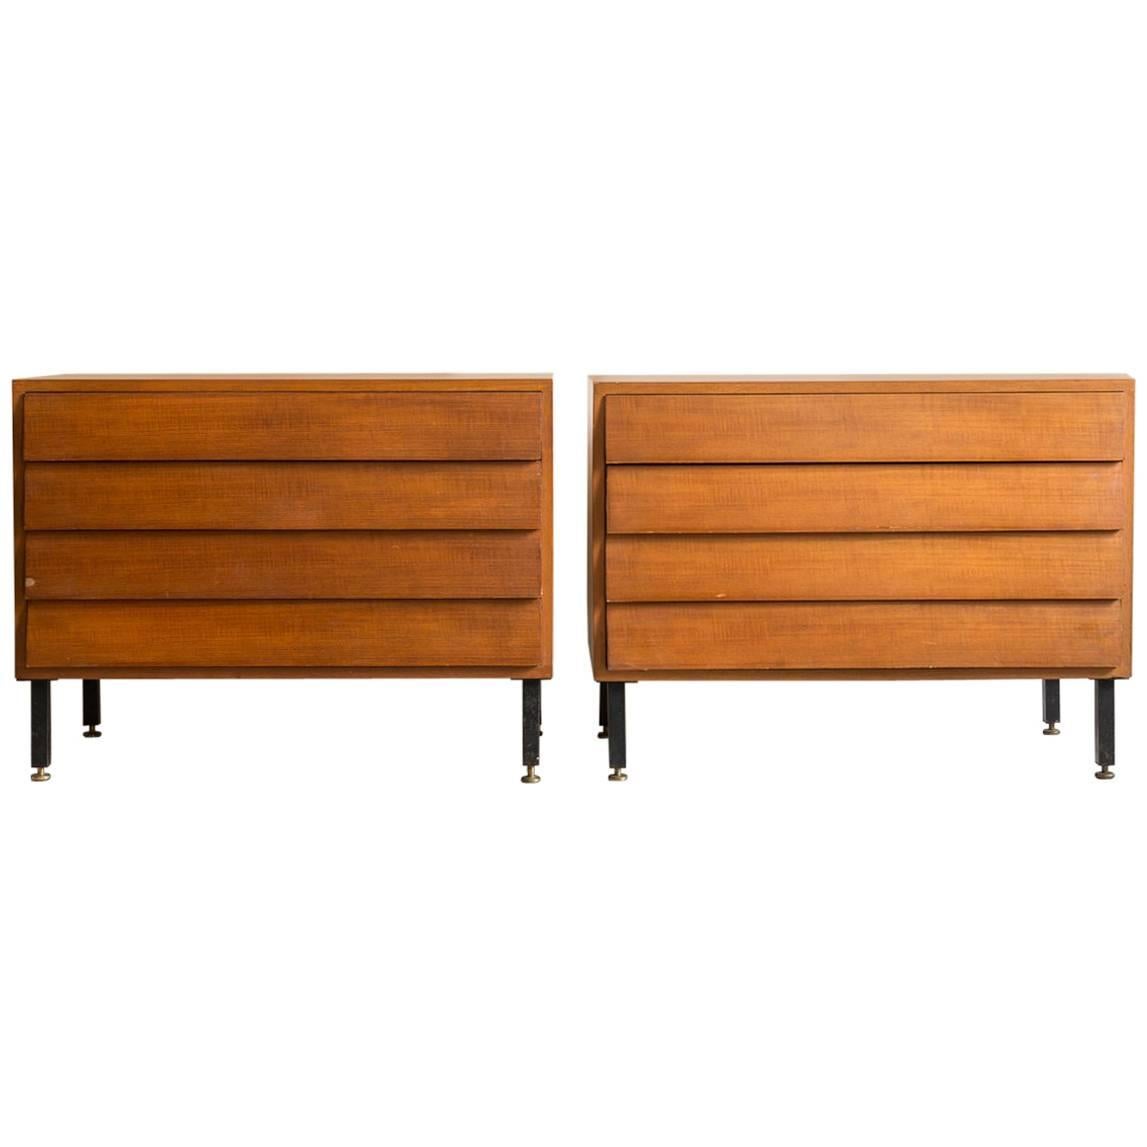 Pair of Walnut Four-Drawer Slatted Side Tables